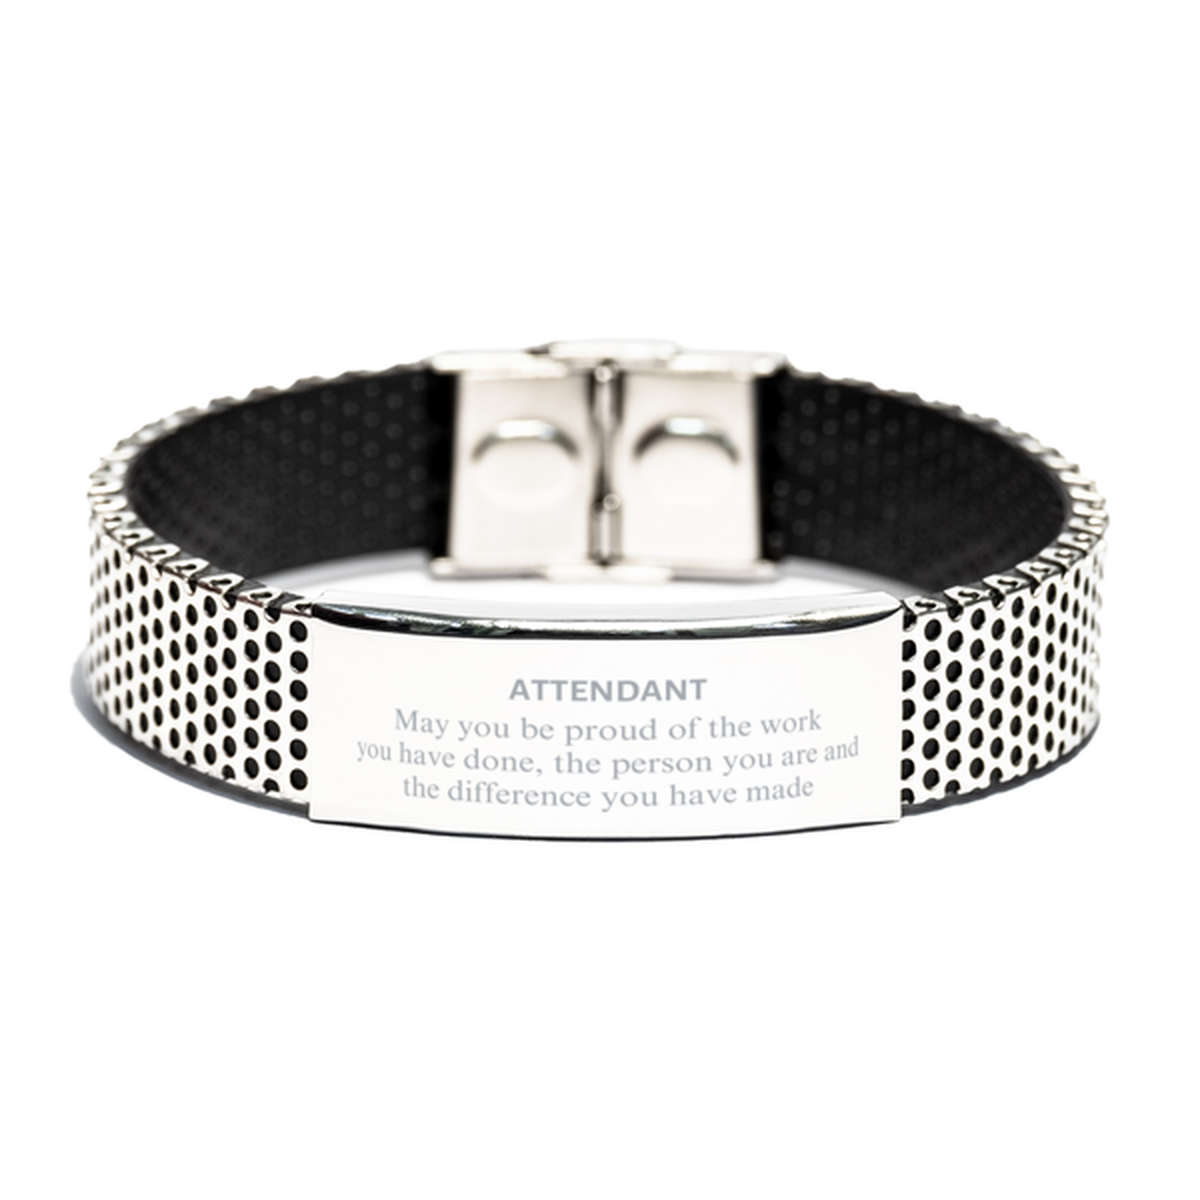 Attendant May you be proud of the work you have done, Retirement Attendant Stainless Steel Bracelet for Colleague Appreciation Gifts Amazing for Attendant